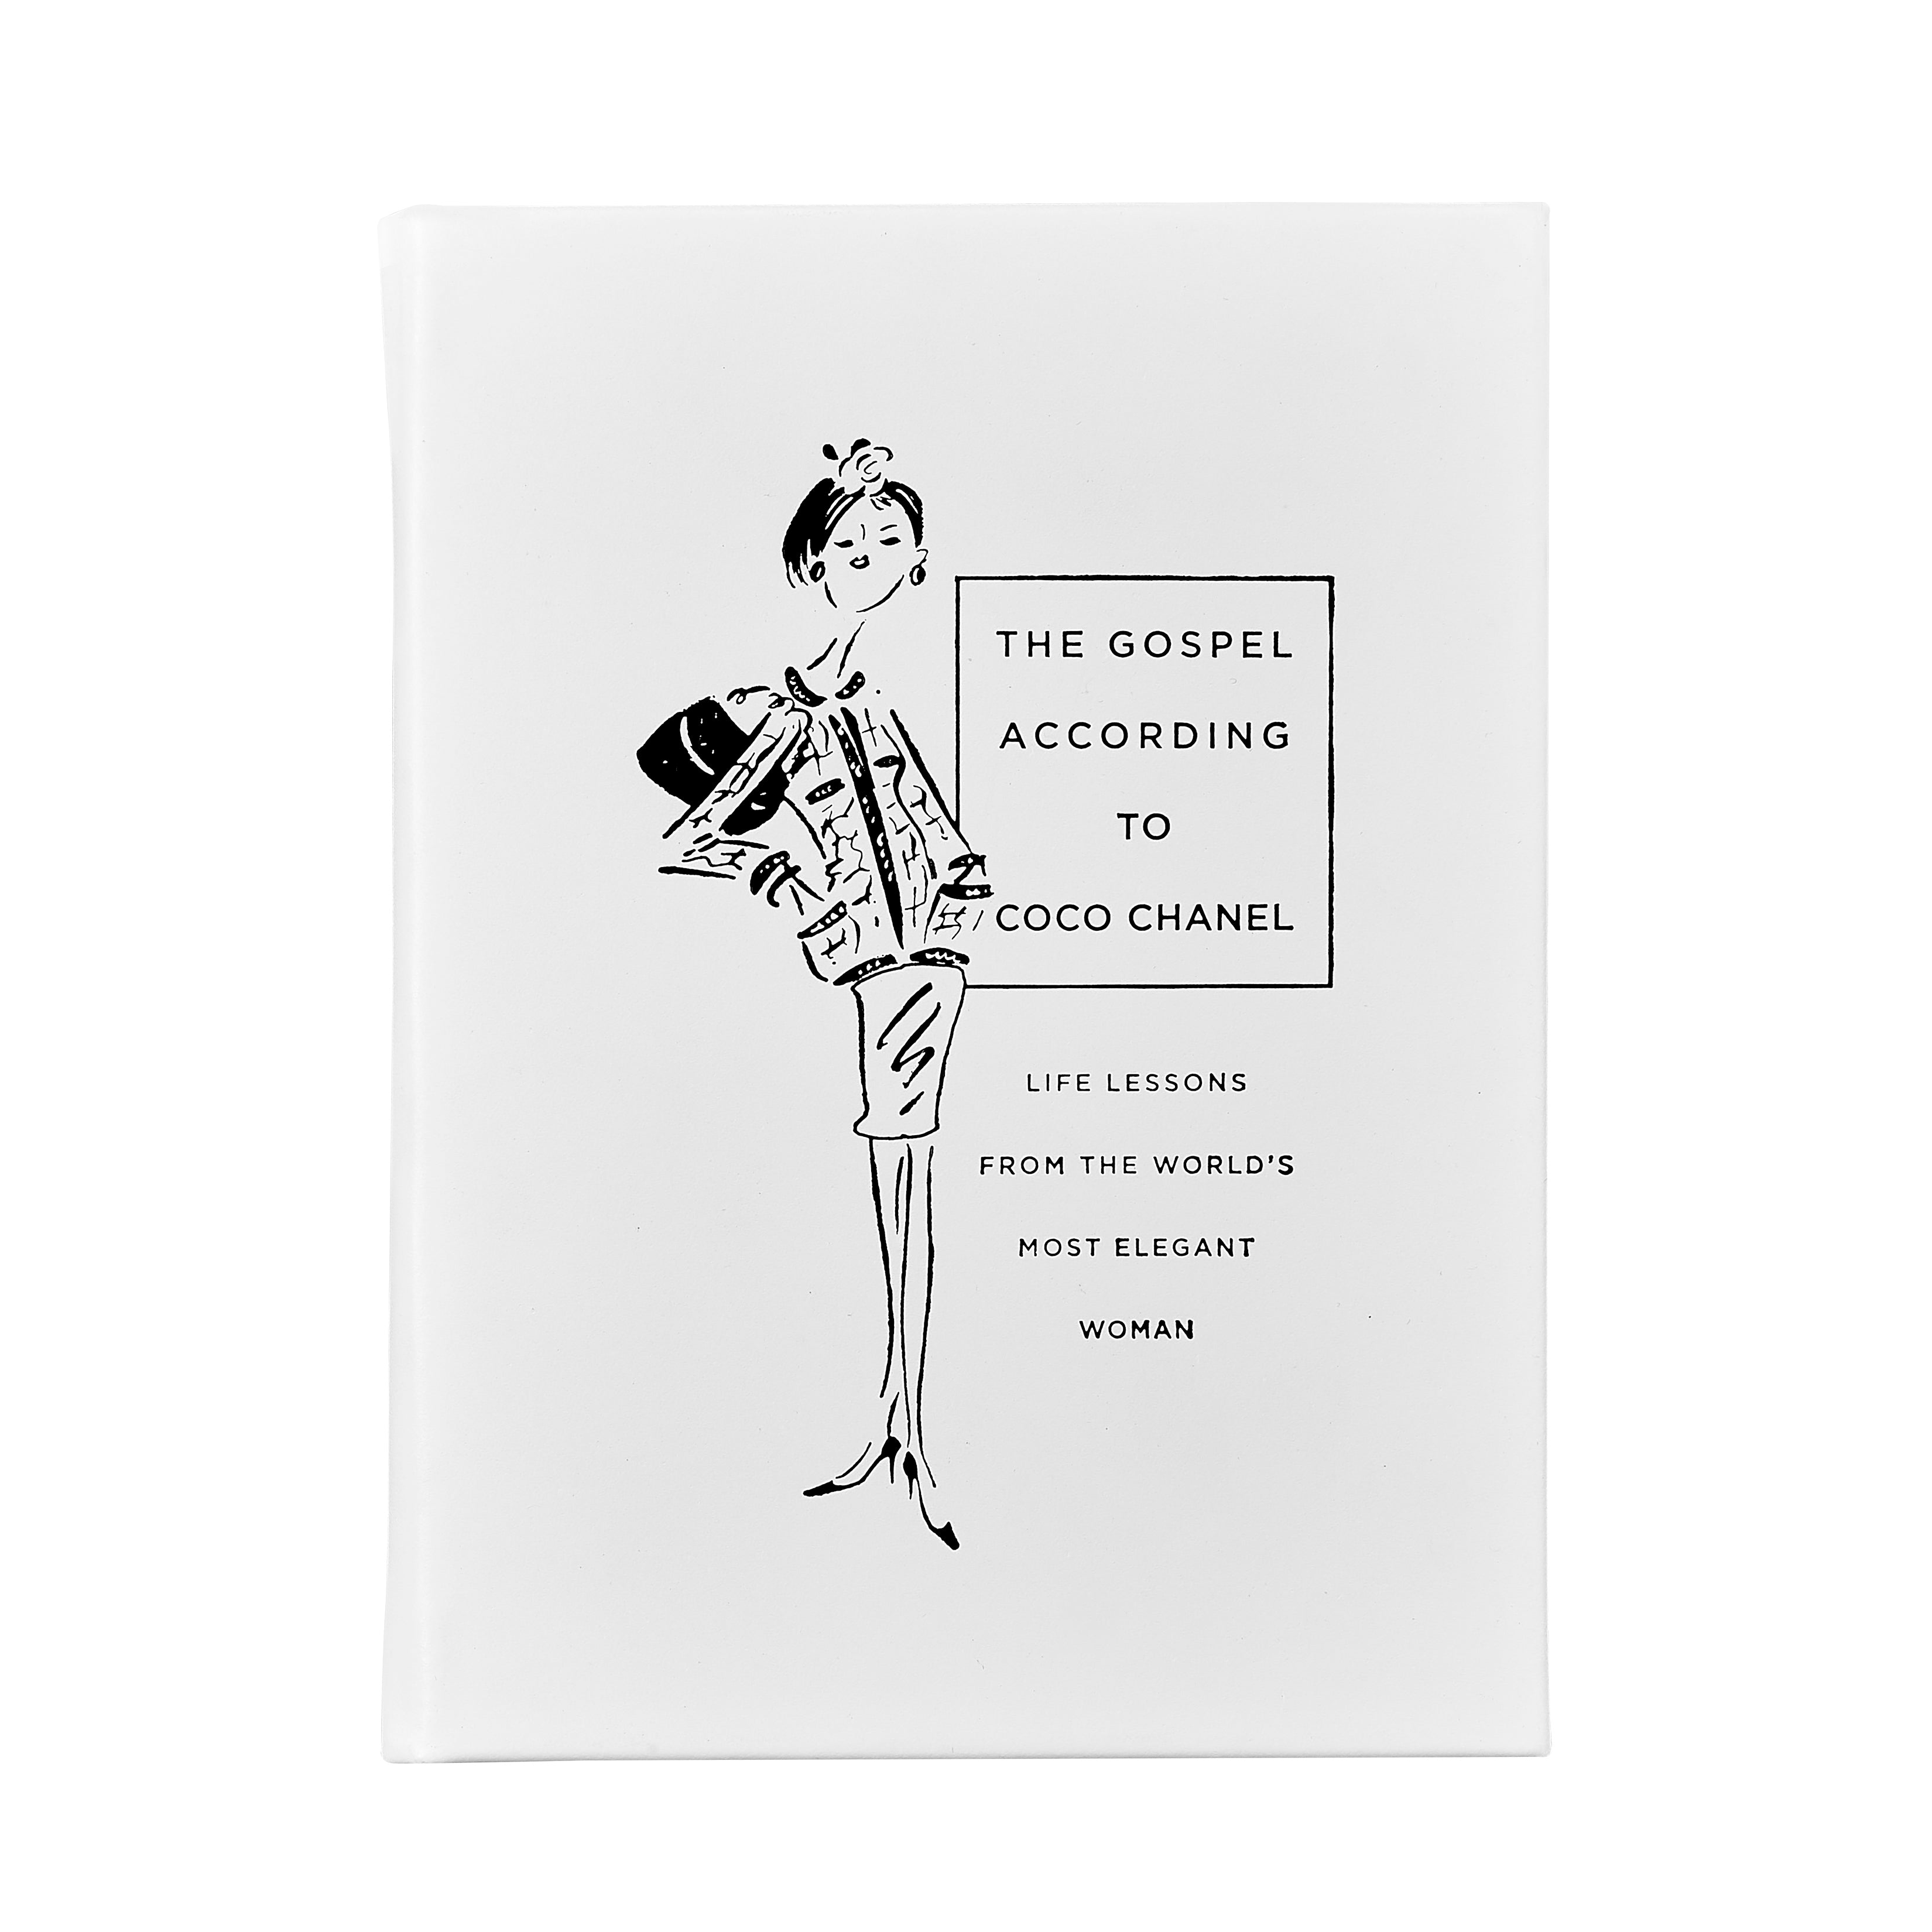 Coco Chanel: An Essence of Mystery [Book]